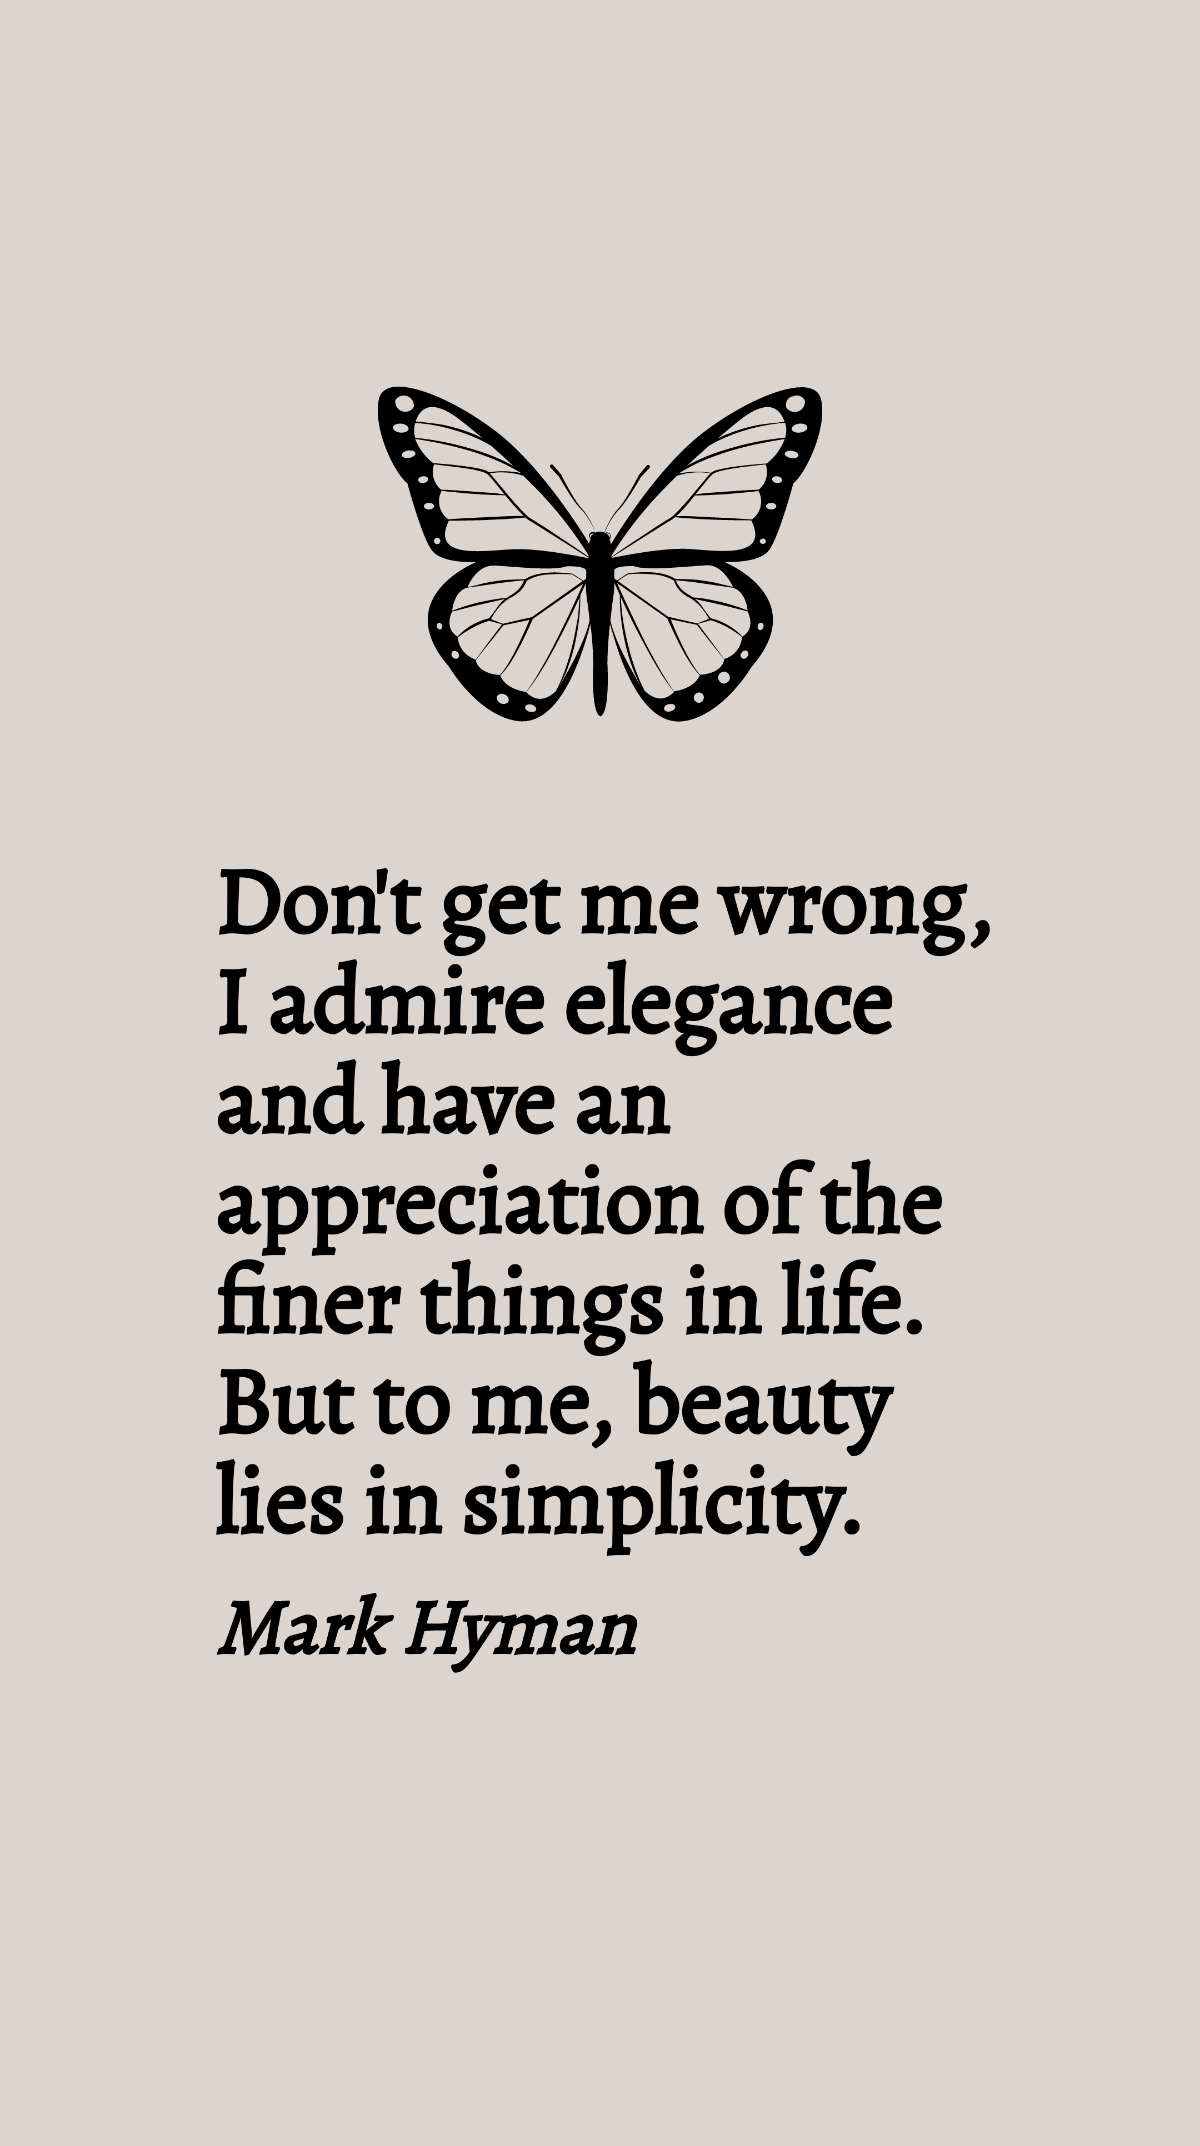 Mark Hyman - Don't get me wrong, I admire elegance and have an appreciation of the finer things in life. But to me, beauty lies in simplicity. Template